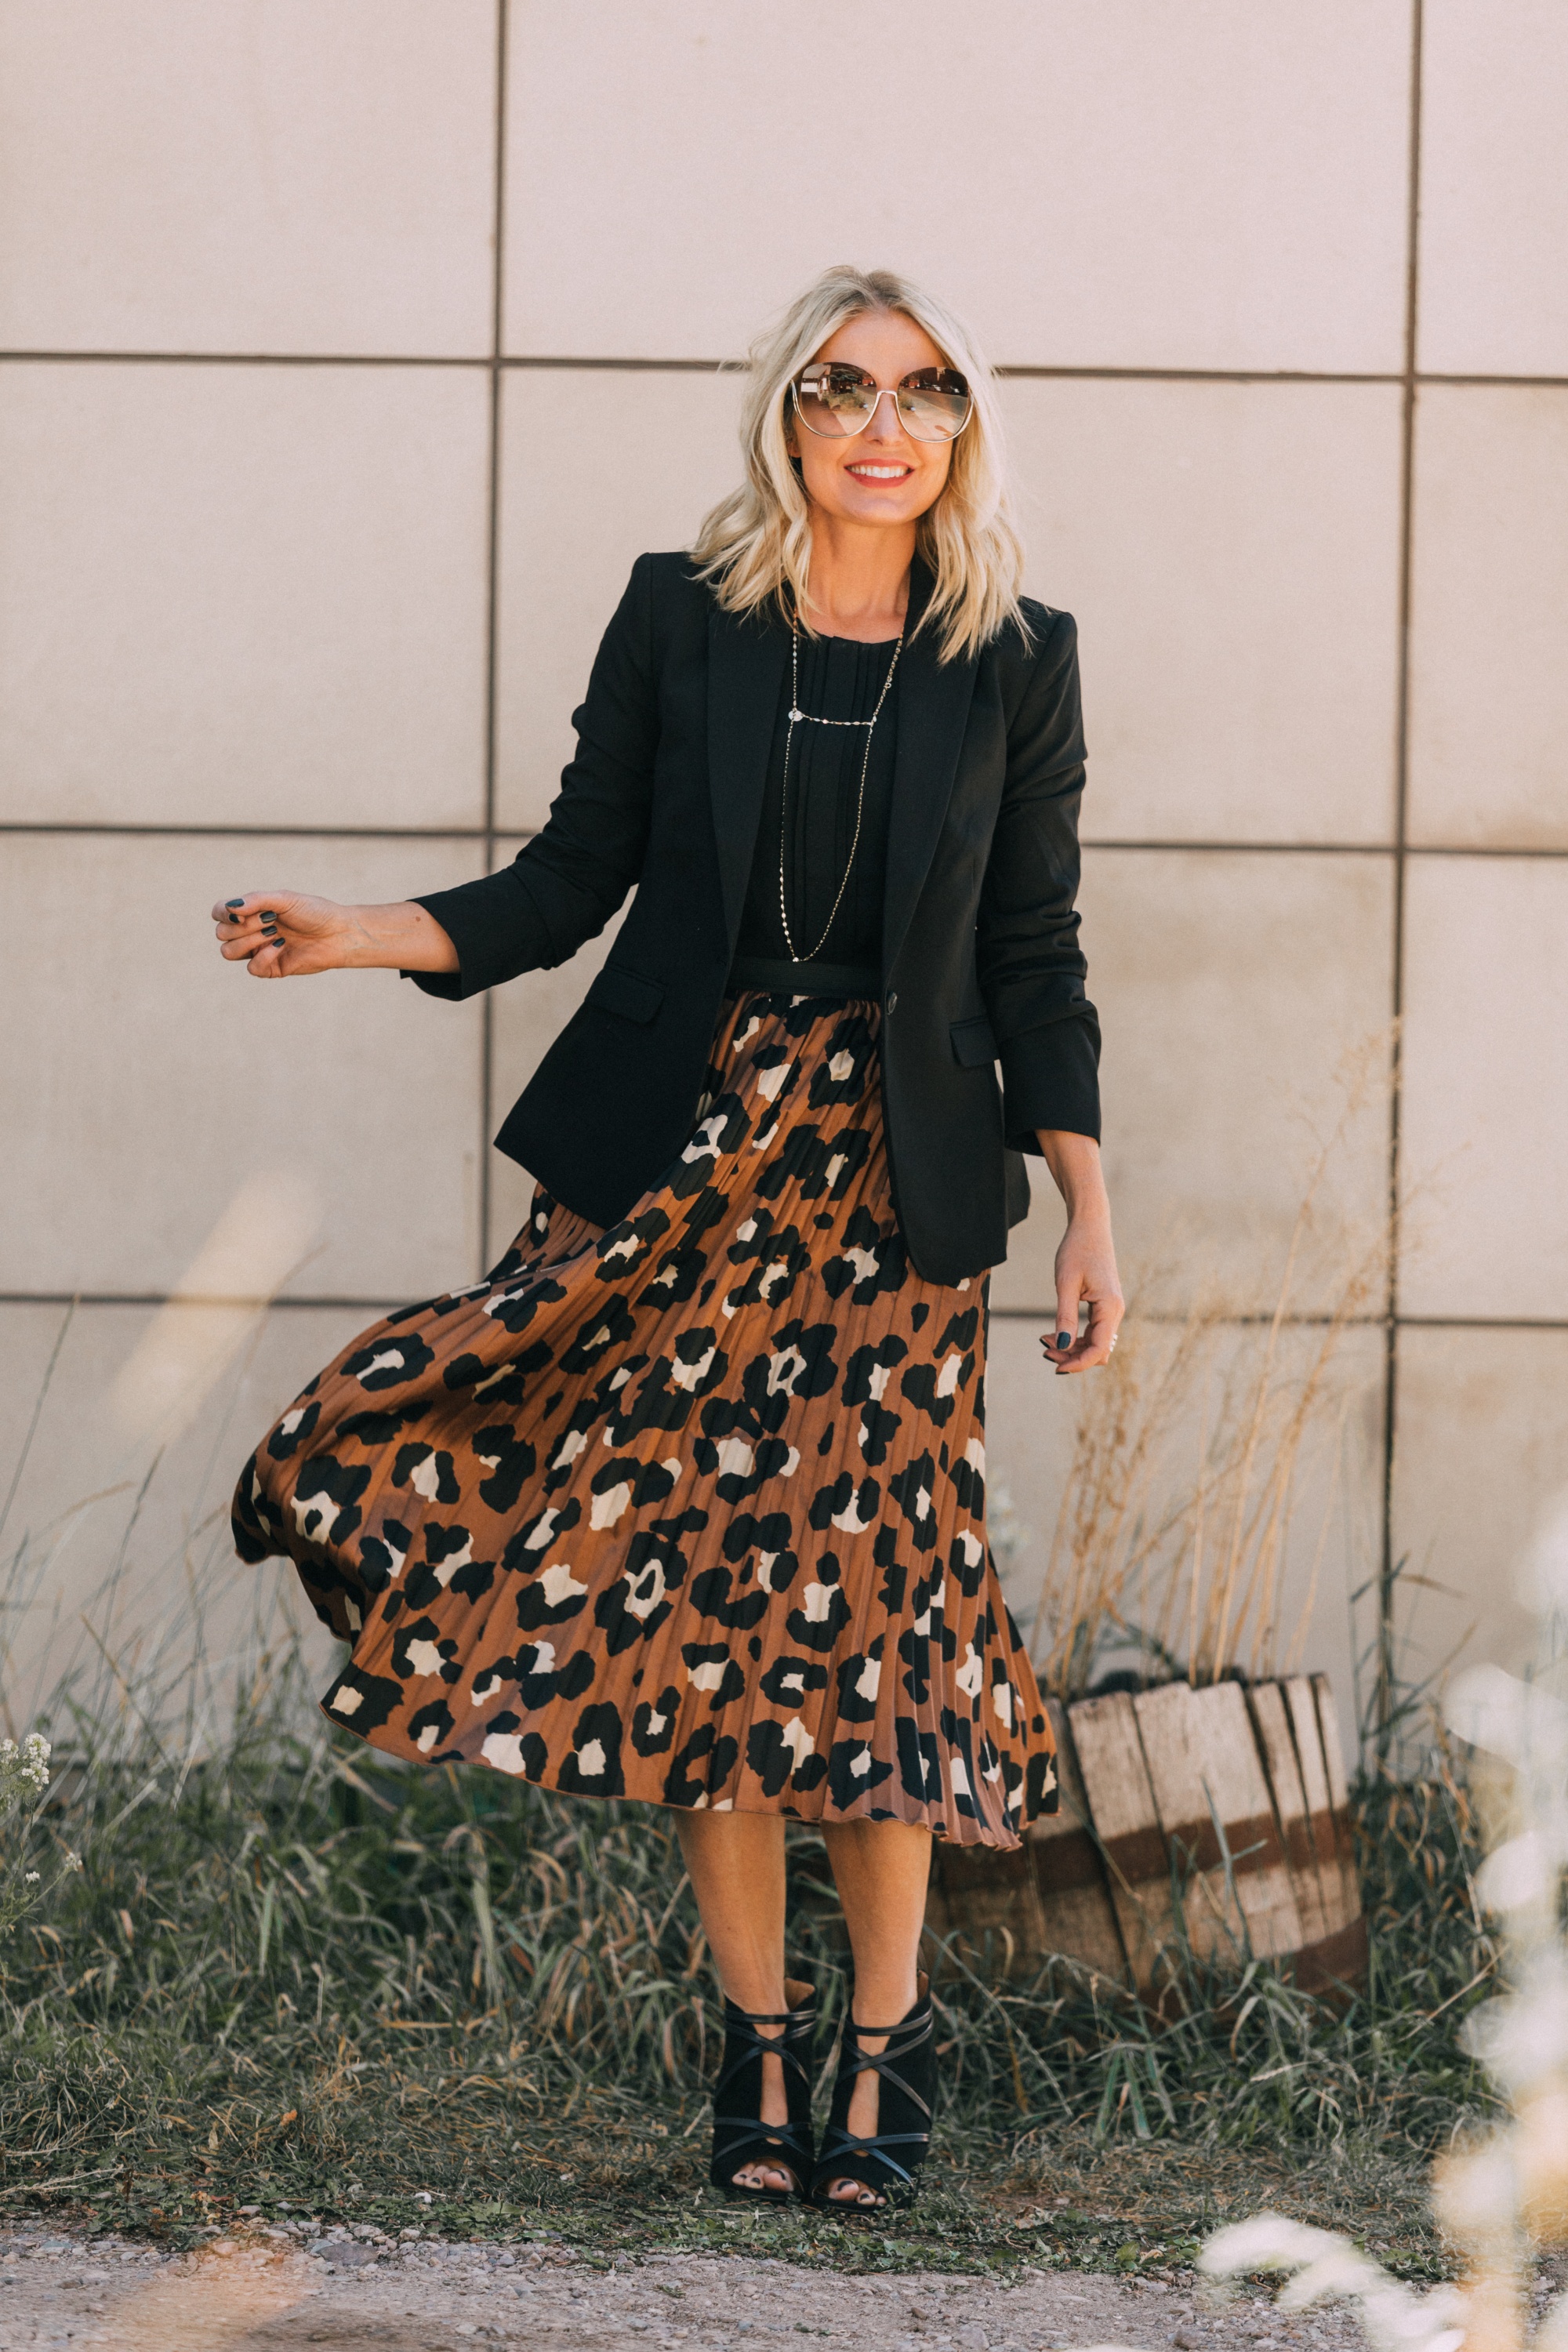 Affordable Blazers fashion blogger outfit with leopard print midi skirt workwear